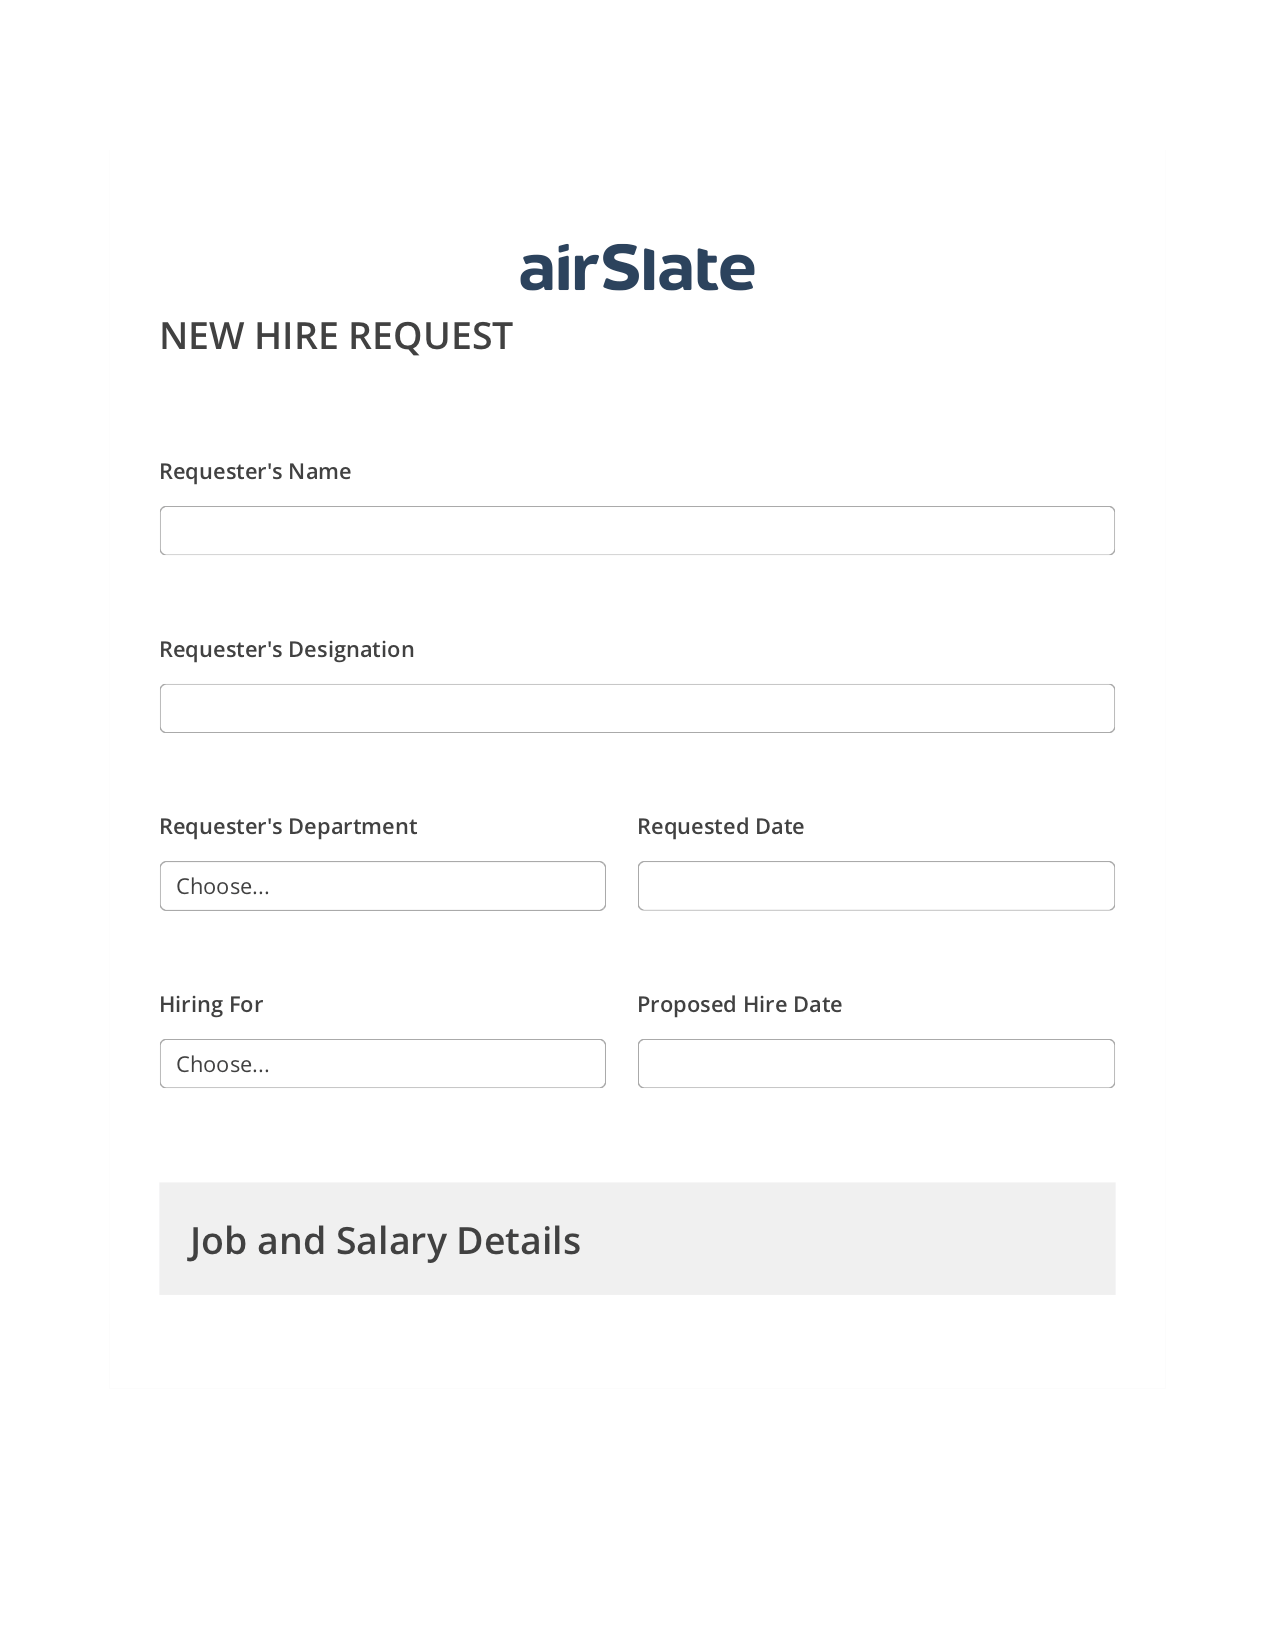 Hiring Request Workflow Pre-fill from Salesforce Records Bot, Slack Notification Bot, Export to NetSuite Bot